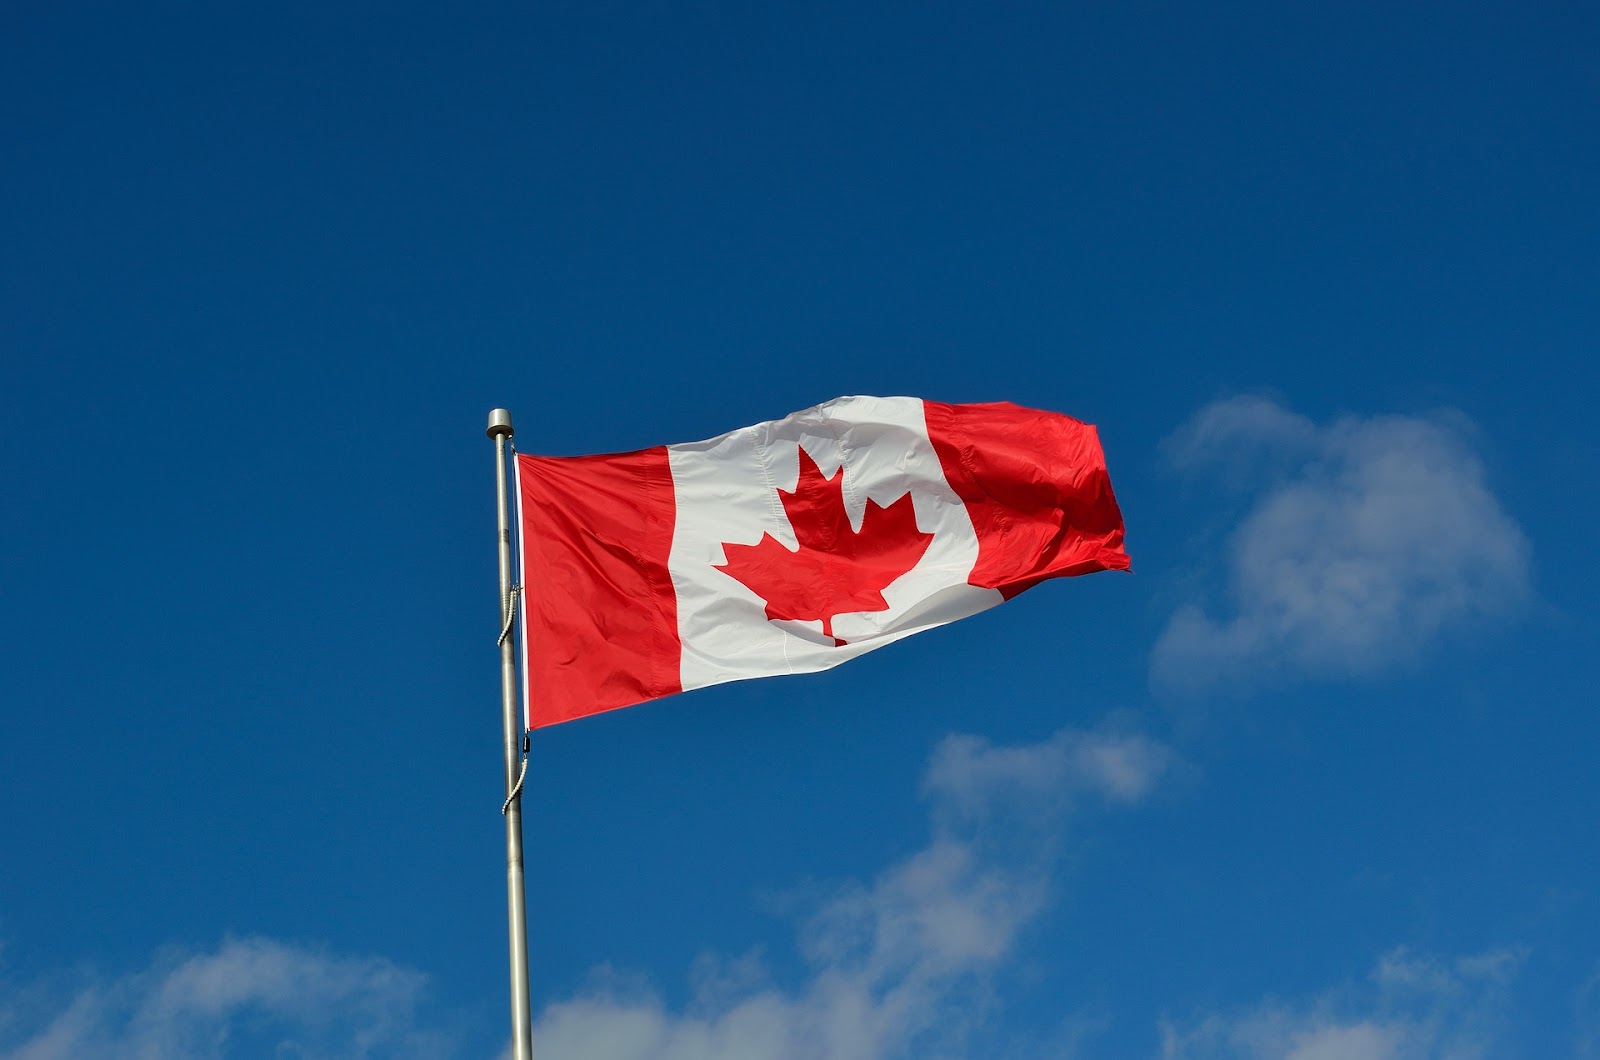 Canadian flag against blue sky backdrop with clouds